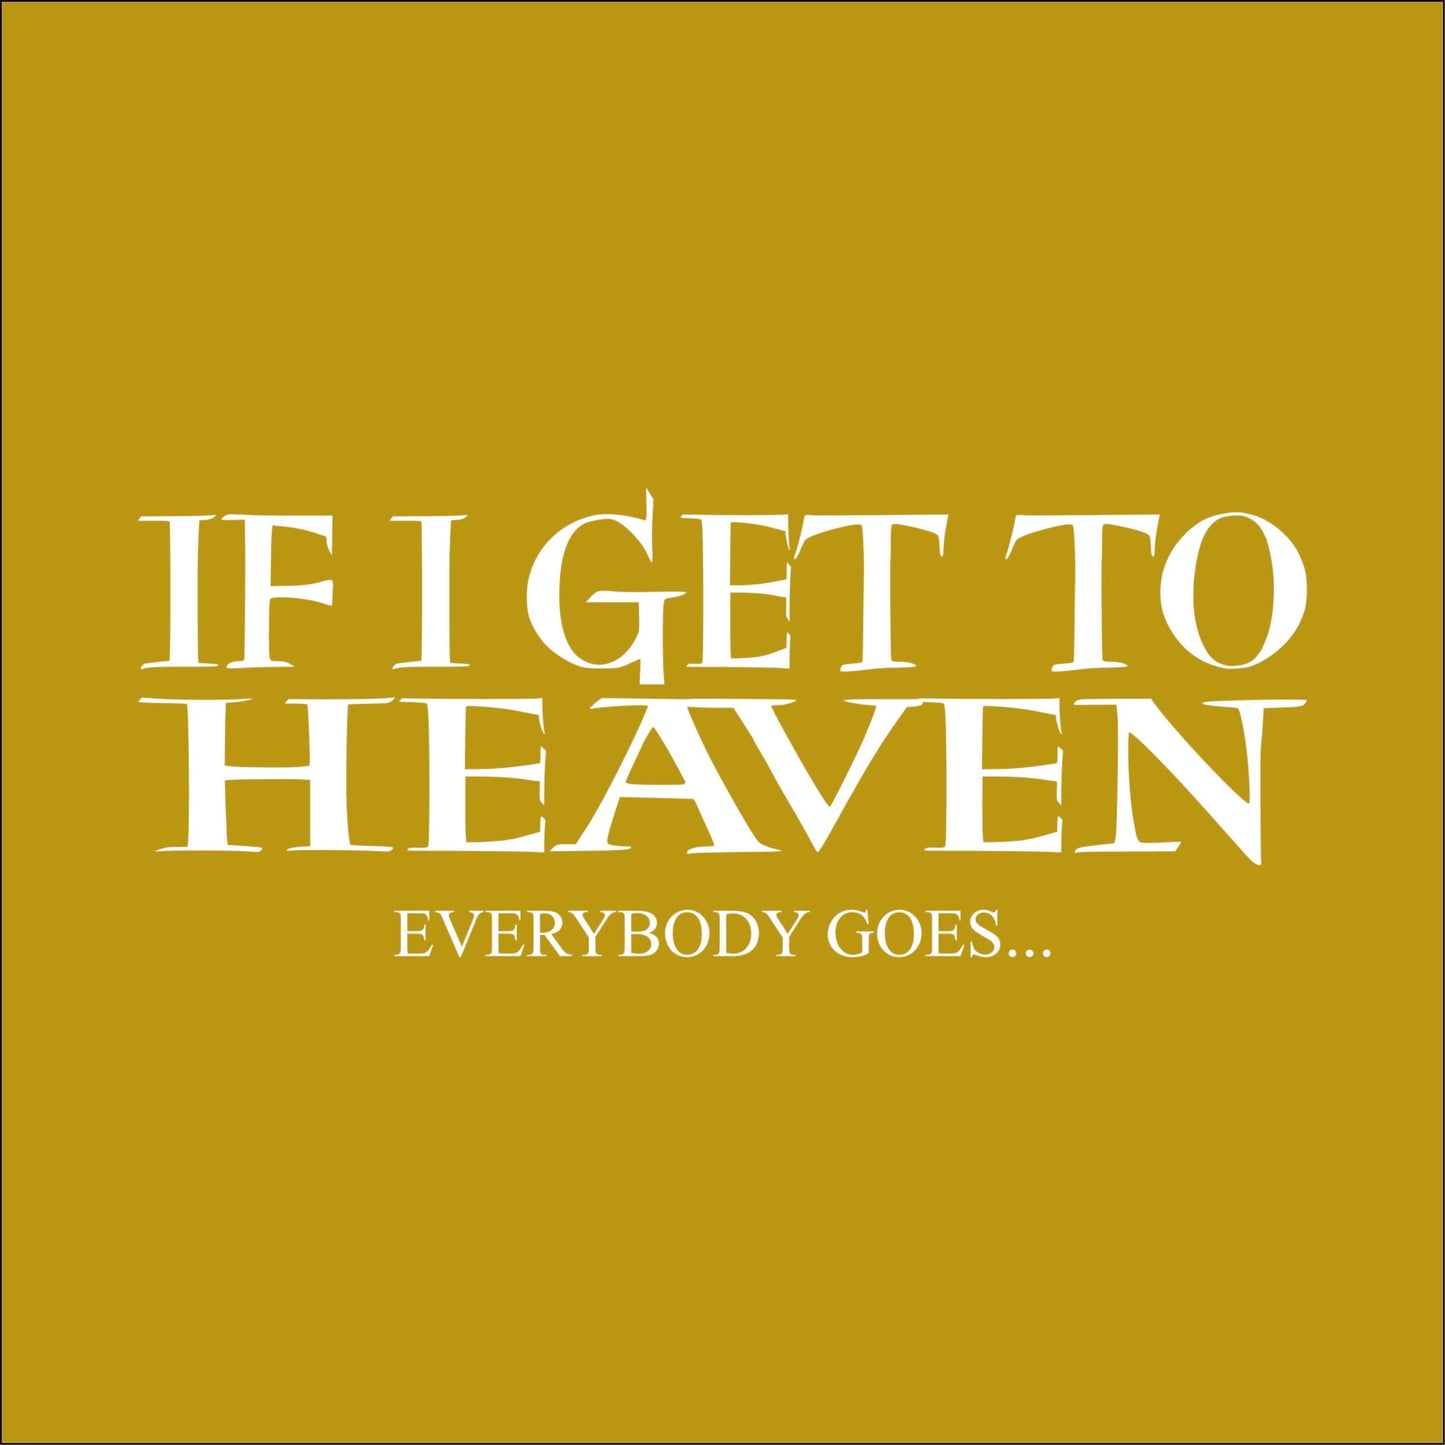 If I Get to Heaven, Everybody goes